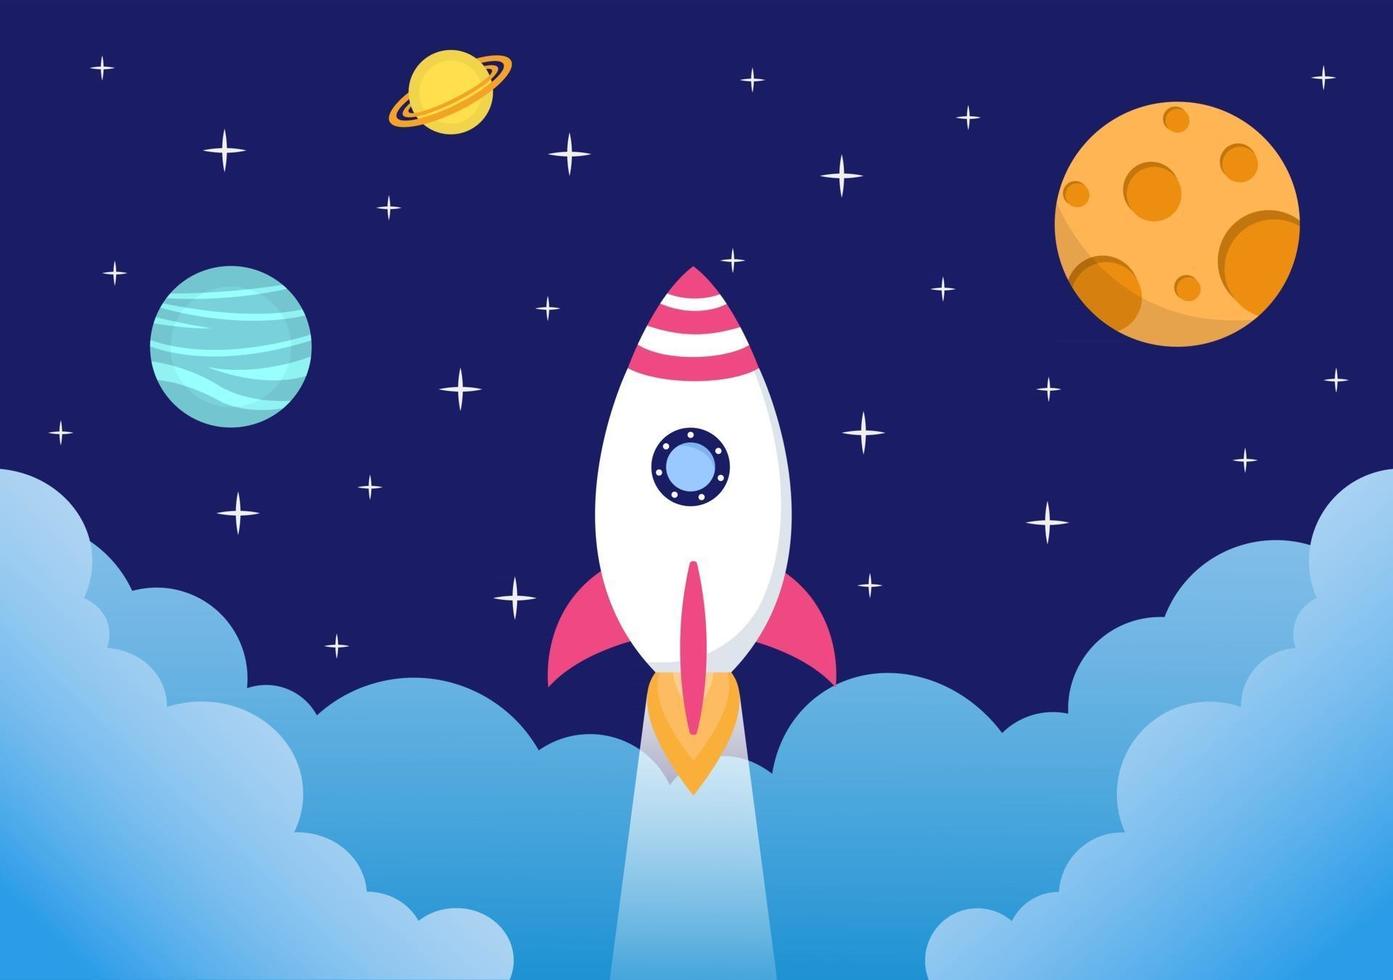 Cute Astronaut In Space Background Illustration vector